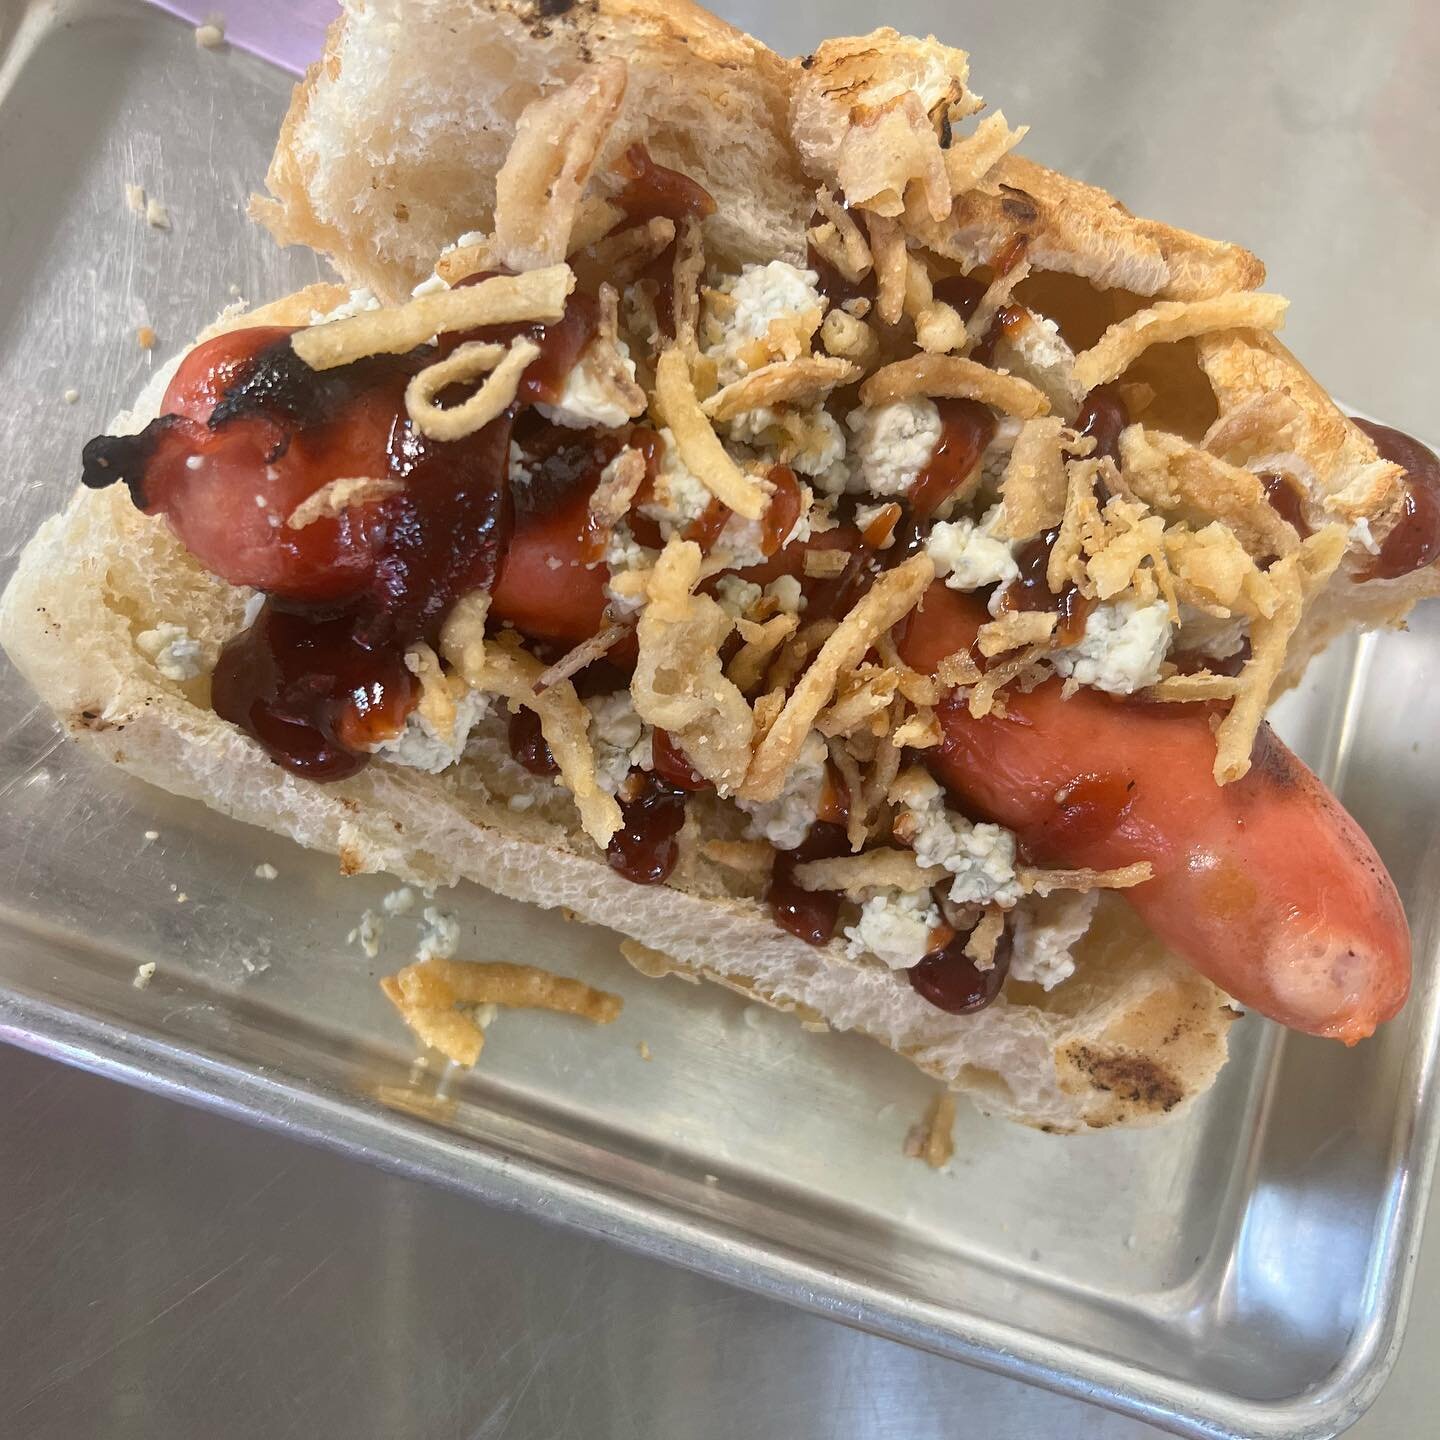 🌭 TODAY&rsquo;S SPECIAL 🌭

BBQ BLEU DOG | $5.00

🥩 STEAK NIGHT 4PM-8PM 🥩 

🥩 8 oz. Strip Steak w/ 2 sides | $15.00

🥩 Chef&rsquo;s Special w/ 2 sides | $17.00

Strip Steak topped with Gorgonzola Cream Sauce  and Crispy Fried Onions served with 